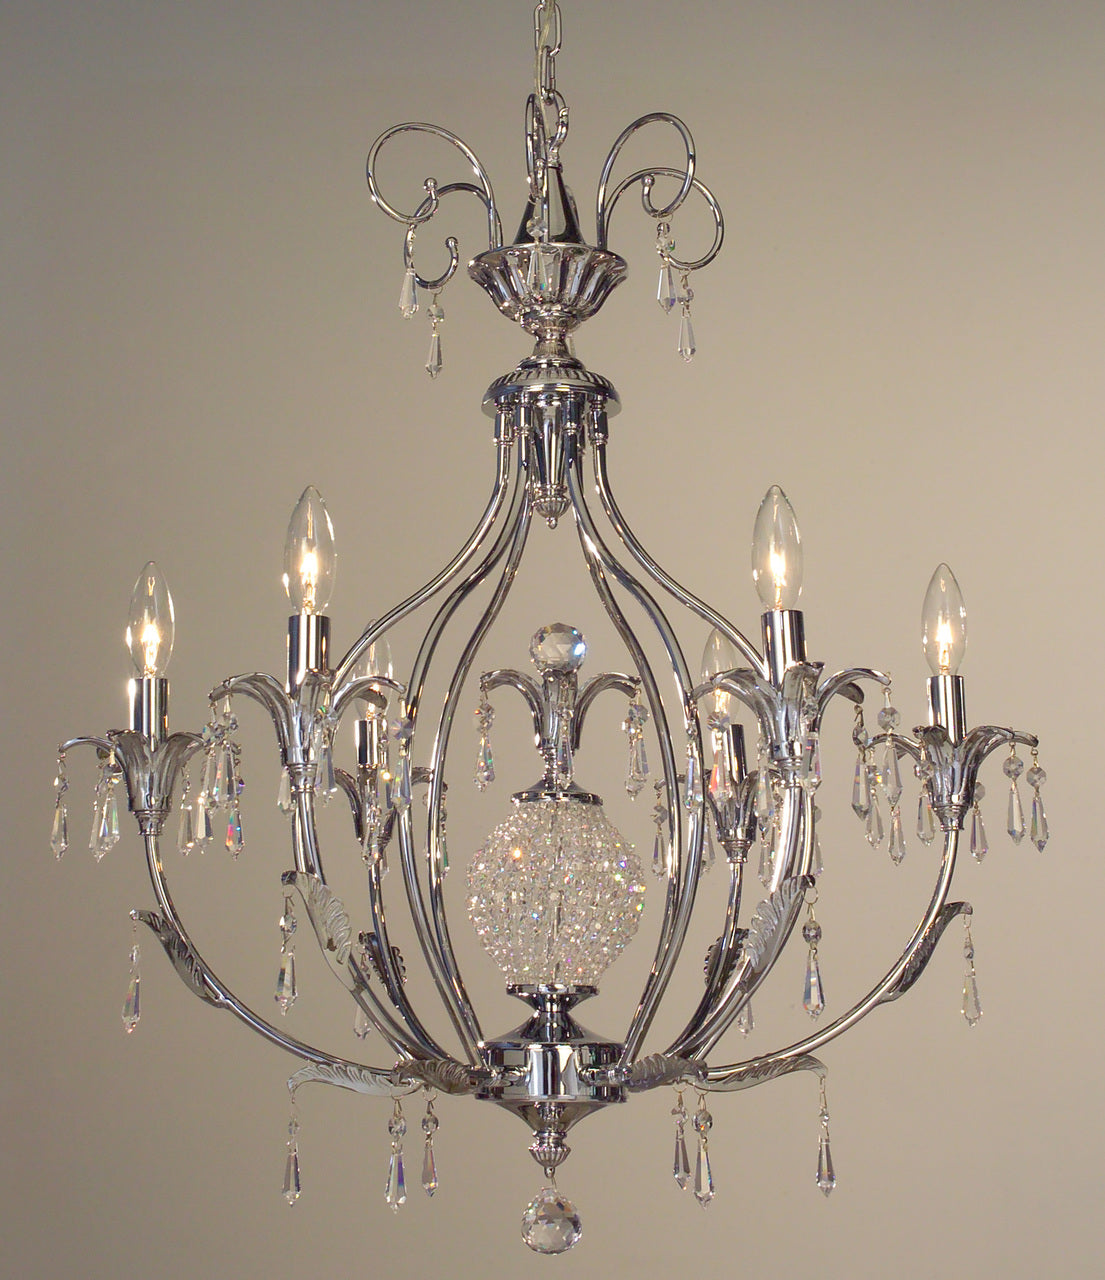 Classic Lighting 16116 CH CP Sharon Crystal Chandelier in Chrome